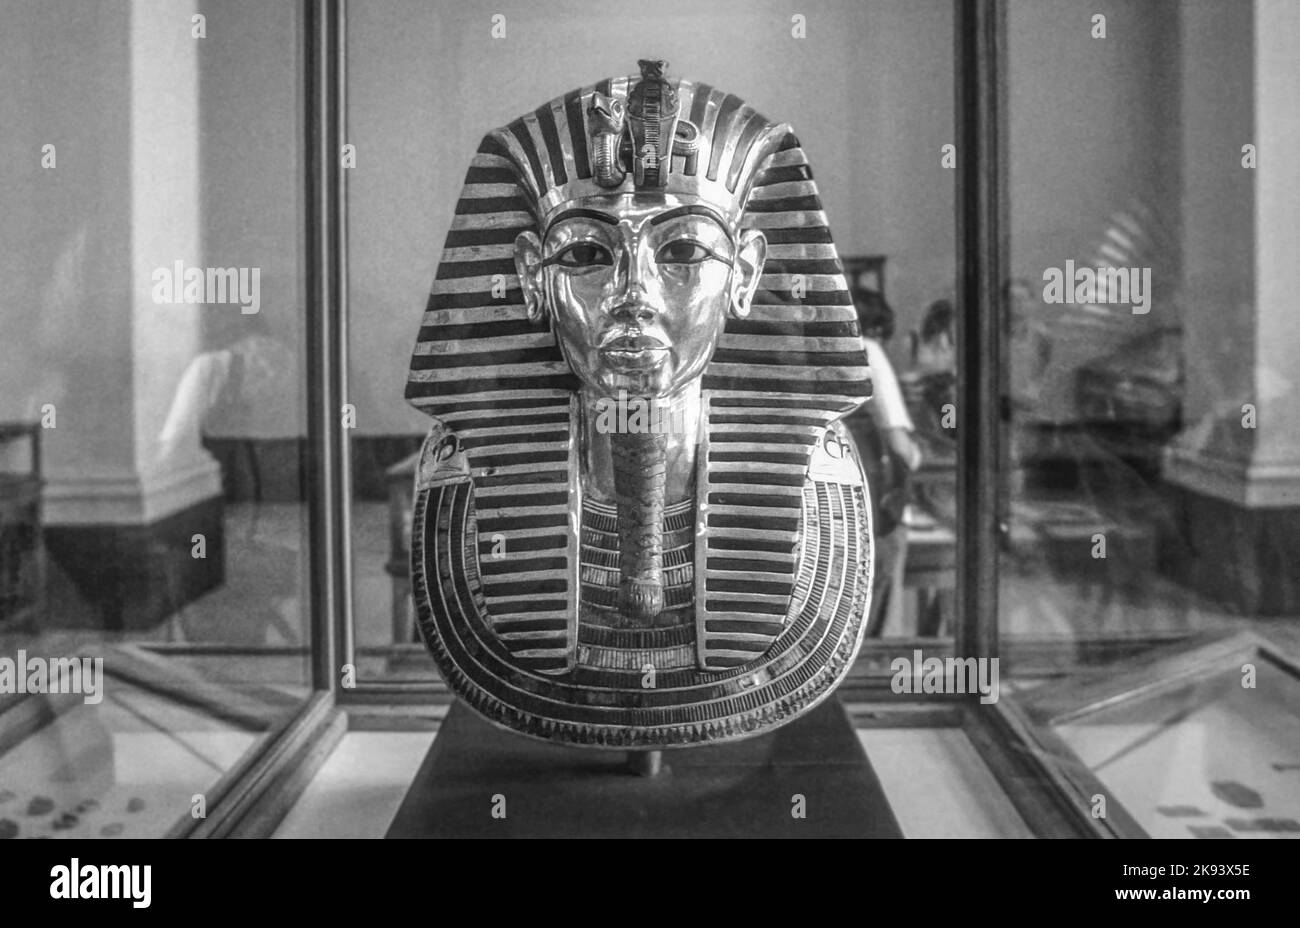 CAIRO, EGYPT - JUNE 10: The Gold Mask of Tutankhamun, composed of 11 kg of solid gold, is on display at the Egyptian Museum on June, 10,1992 in Cairo, Stock Photo